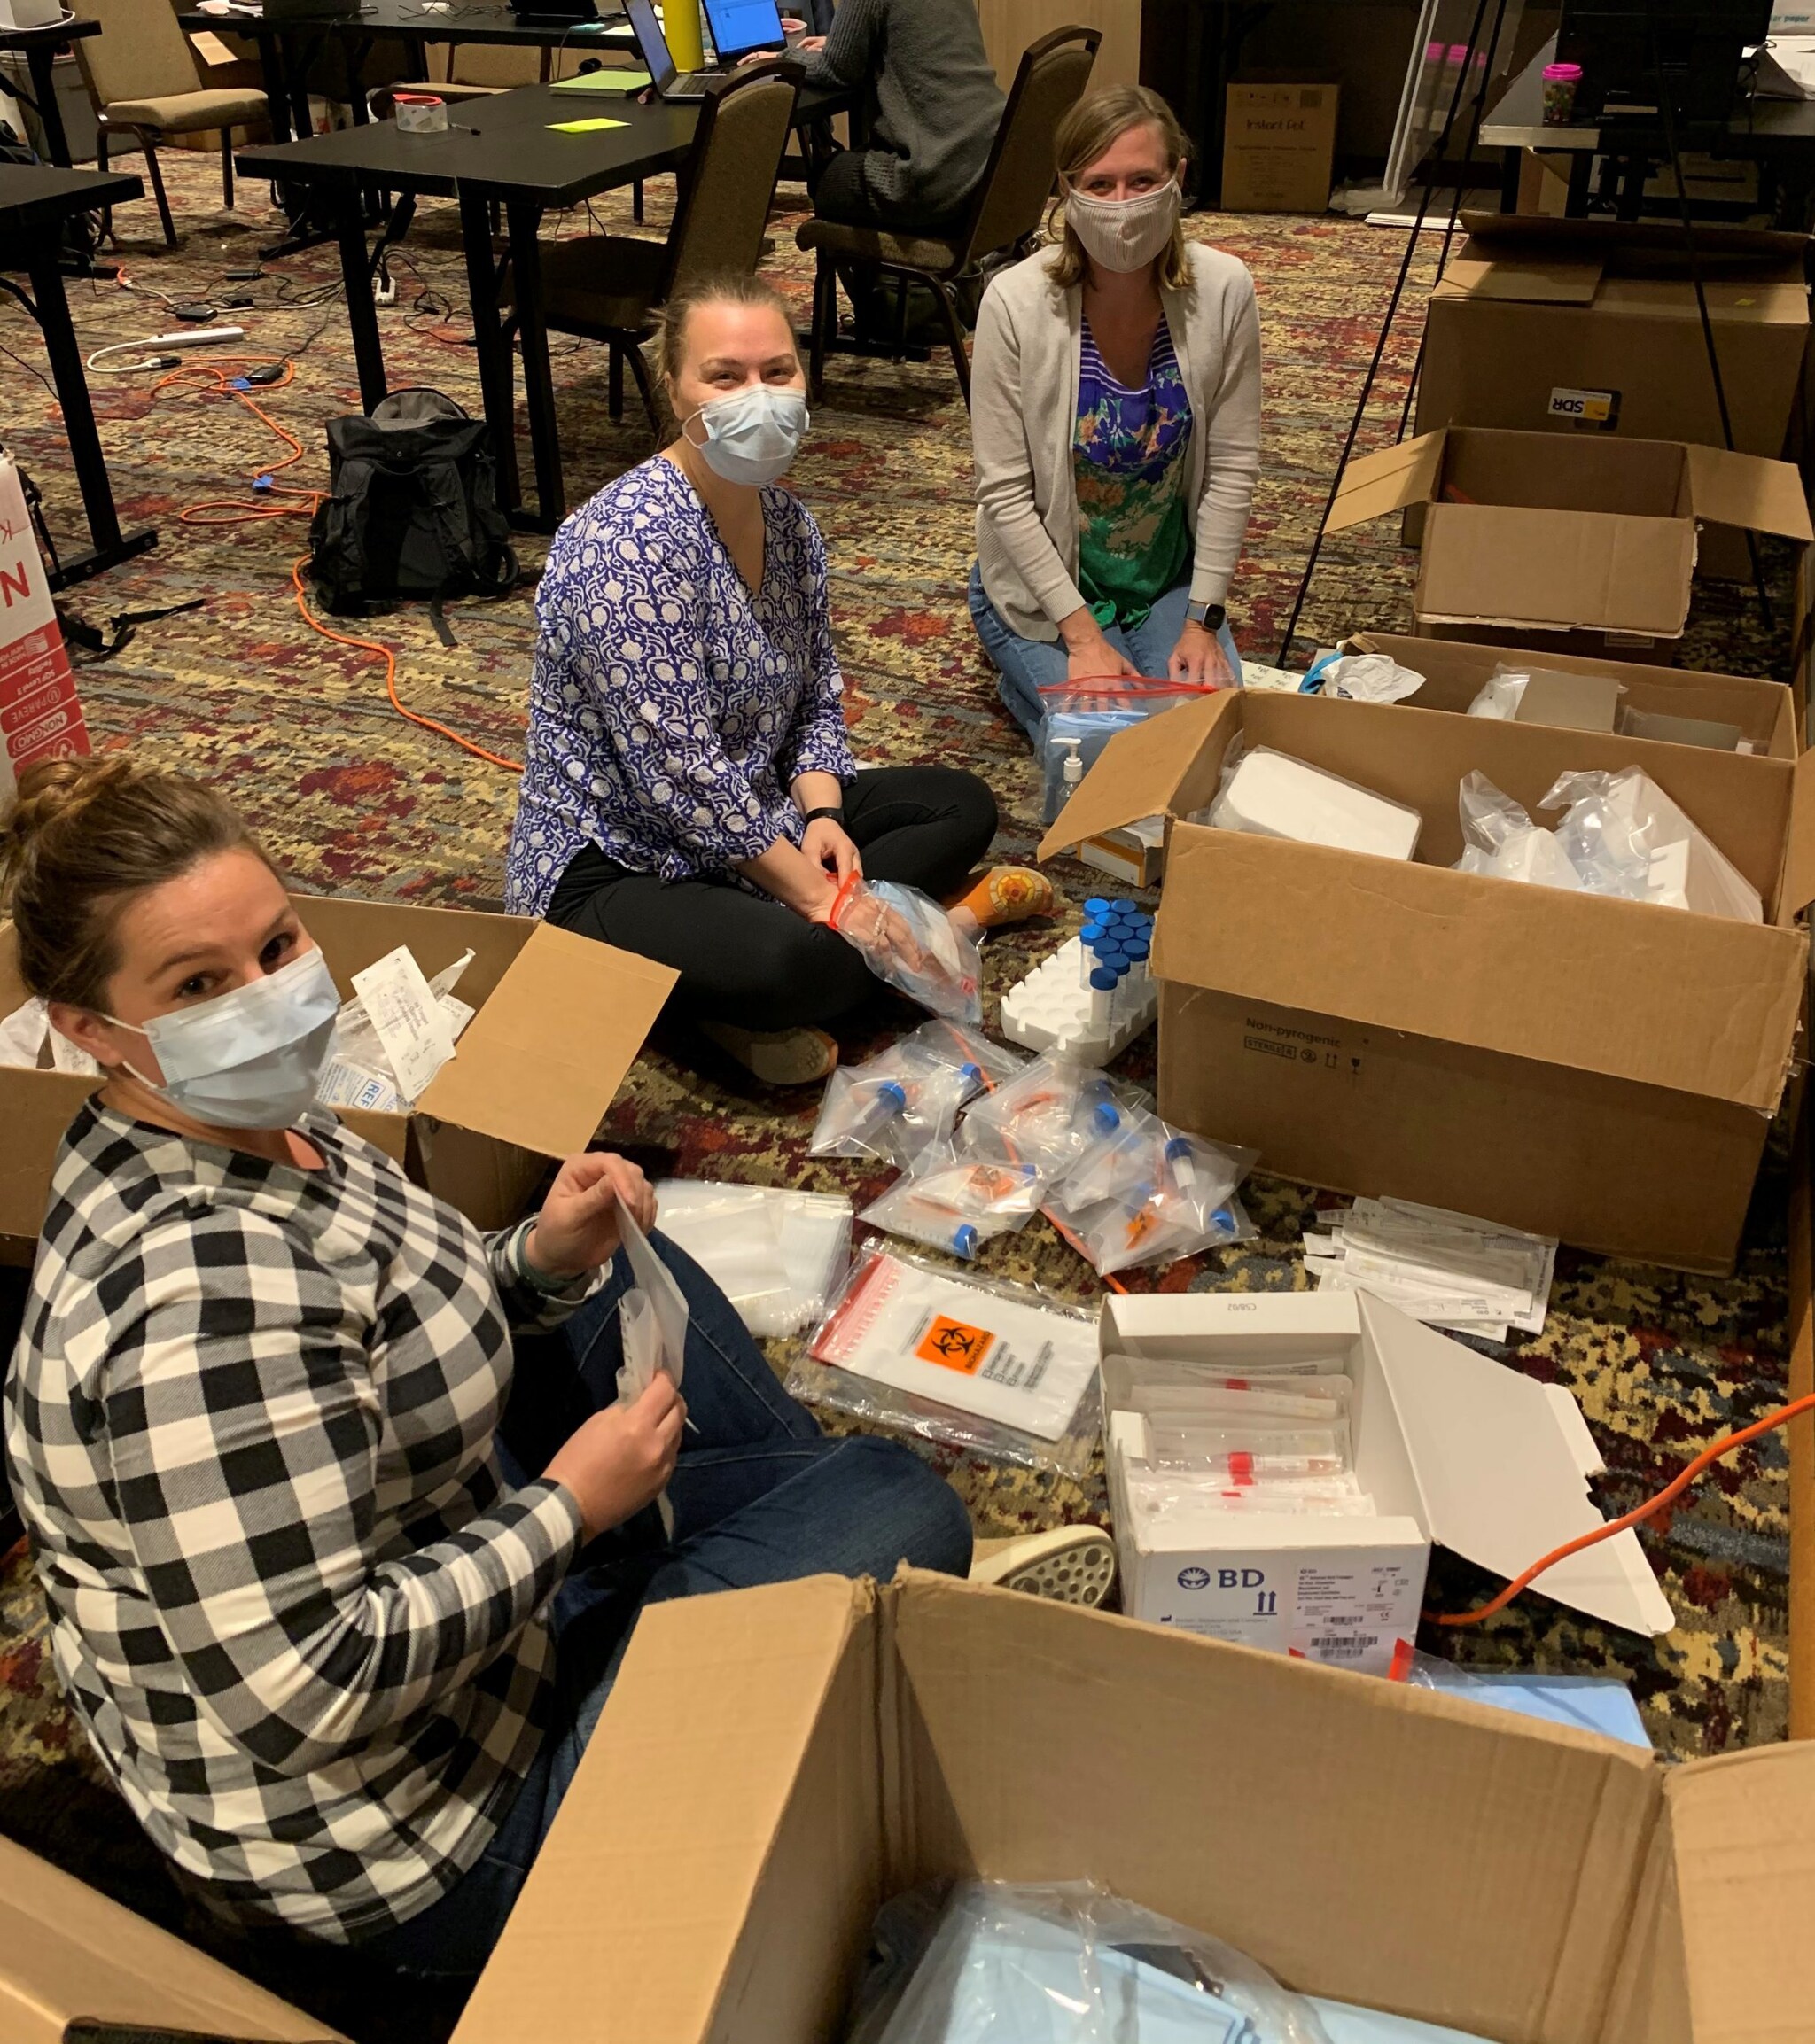 EIS officers Caroline Pratt and Stacey Konkle, along with CDC’s Dana Haberling, sort specimen collection supplies for a COVID-19 household transmission study in San Diego, CA in February 2021.